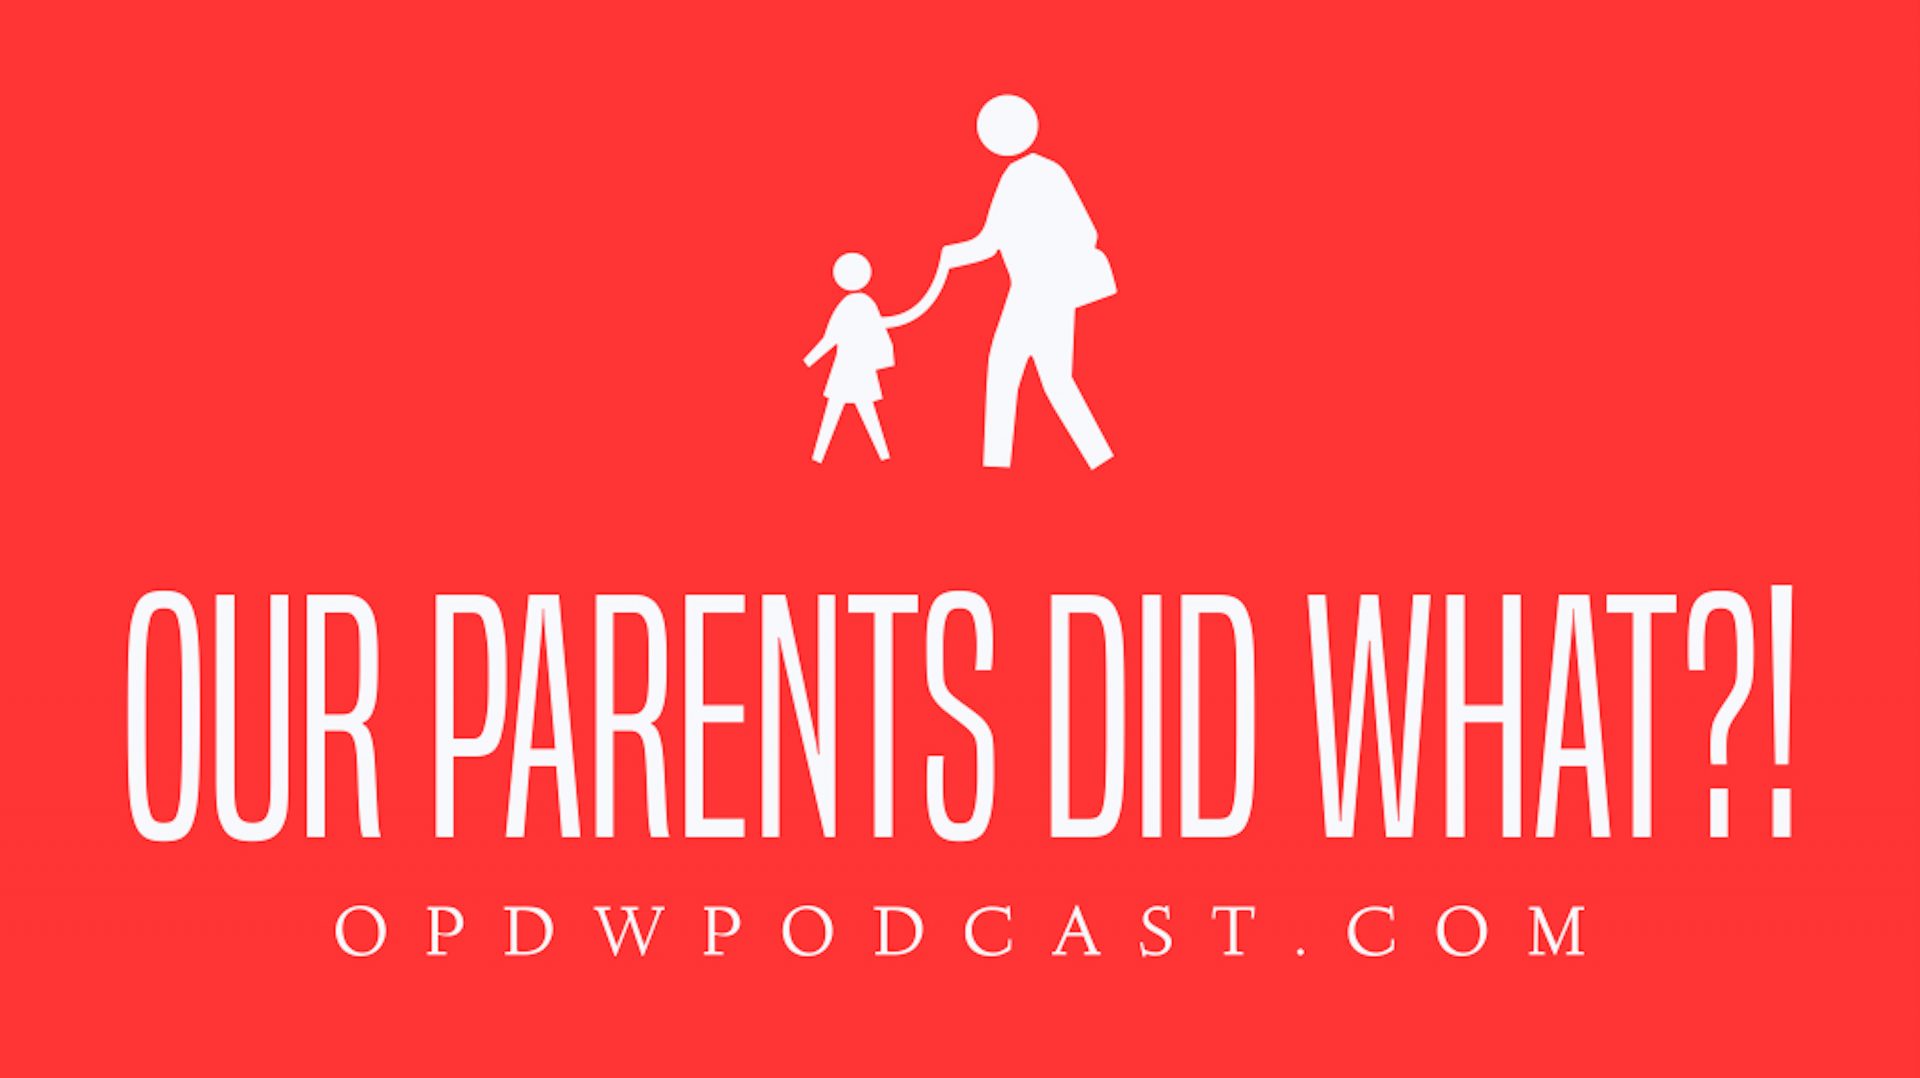 Our Parents Did What?!